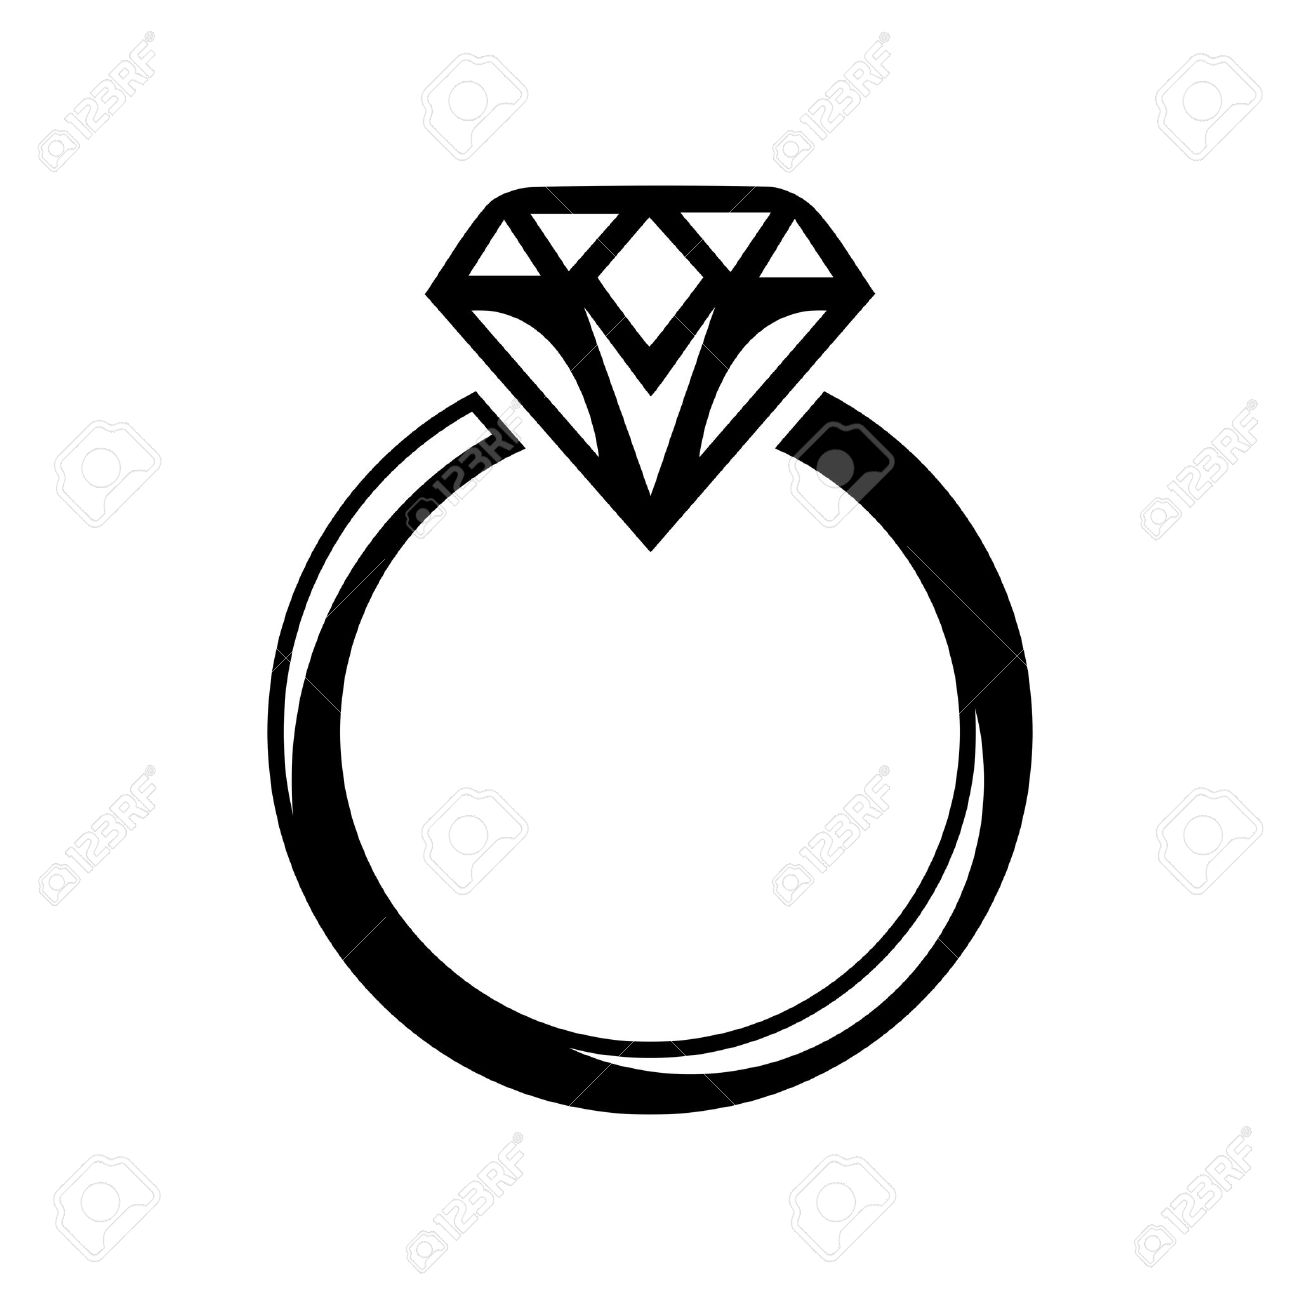 Wedding diamond ring clipart great free clipart silhouette